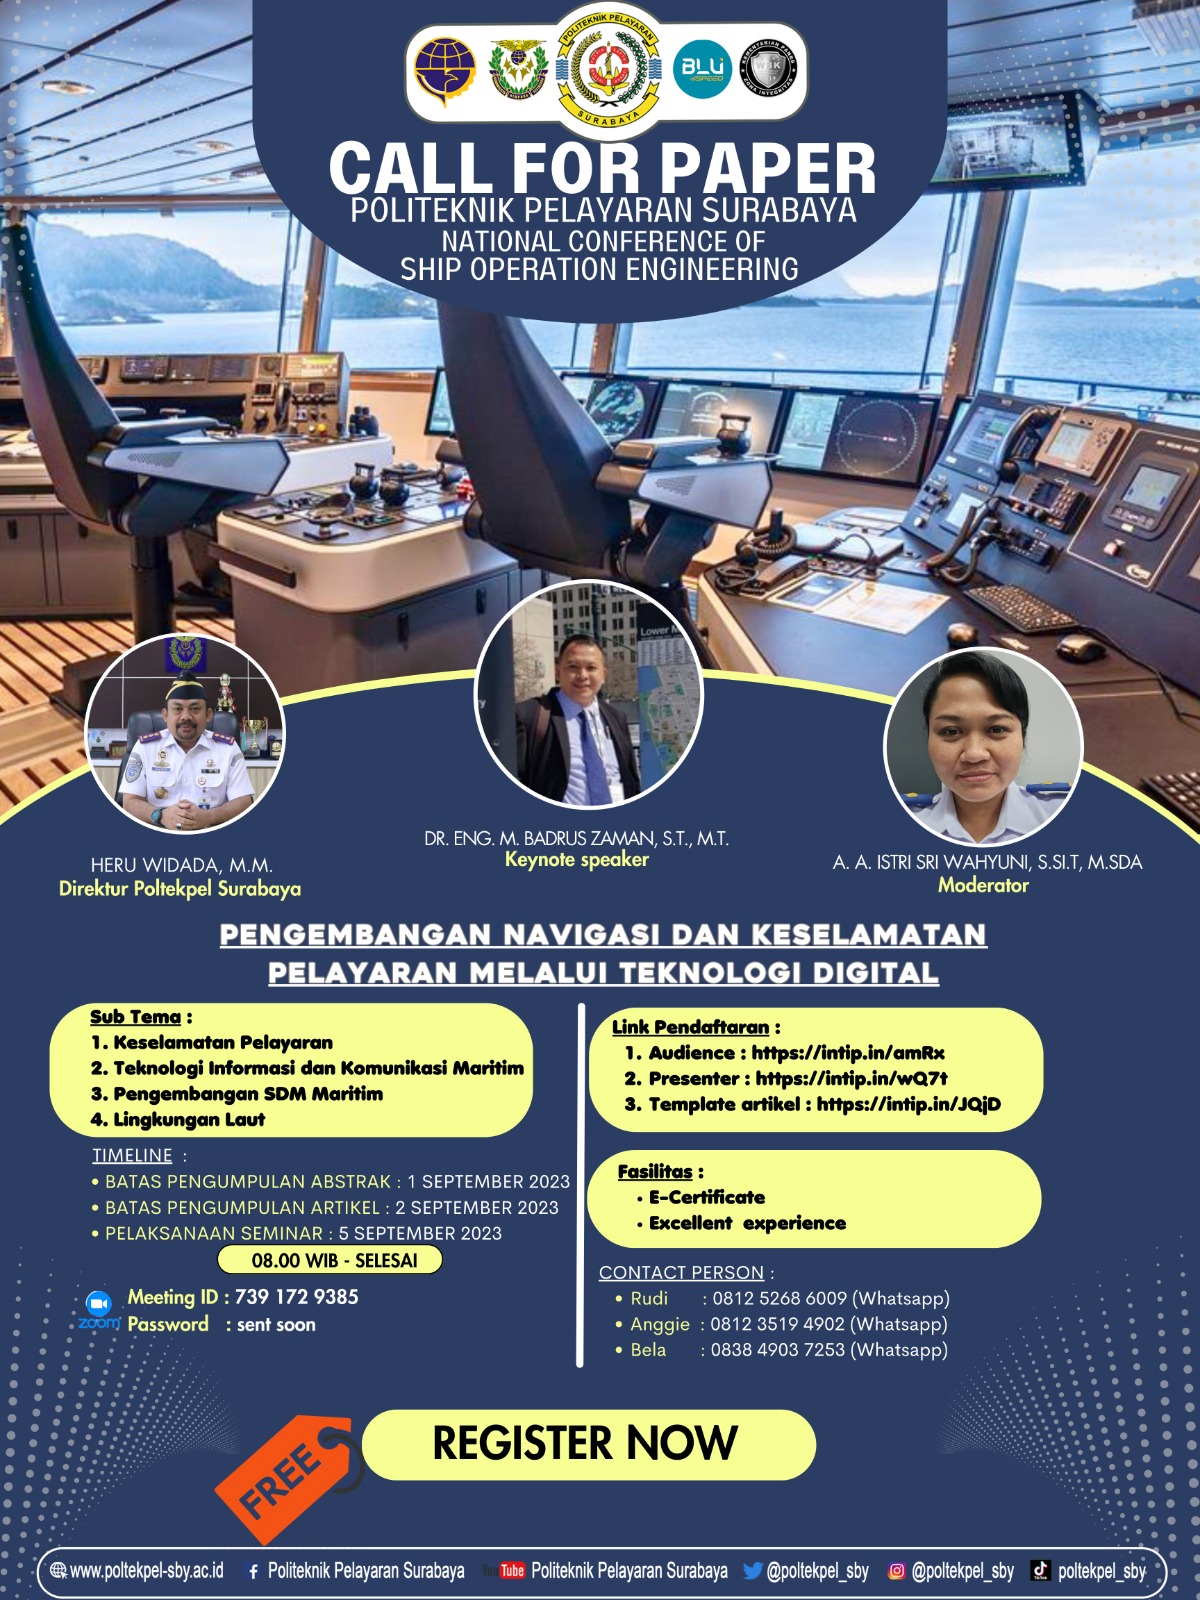 CALL FOR PAPER "NATIONAL CONFERENCE OF SHIP OPERATION ENGINEERING"